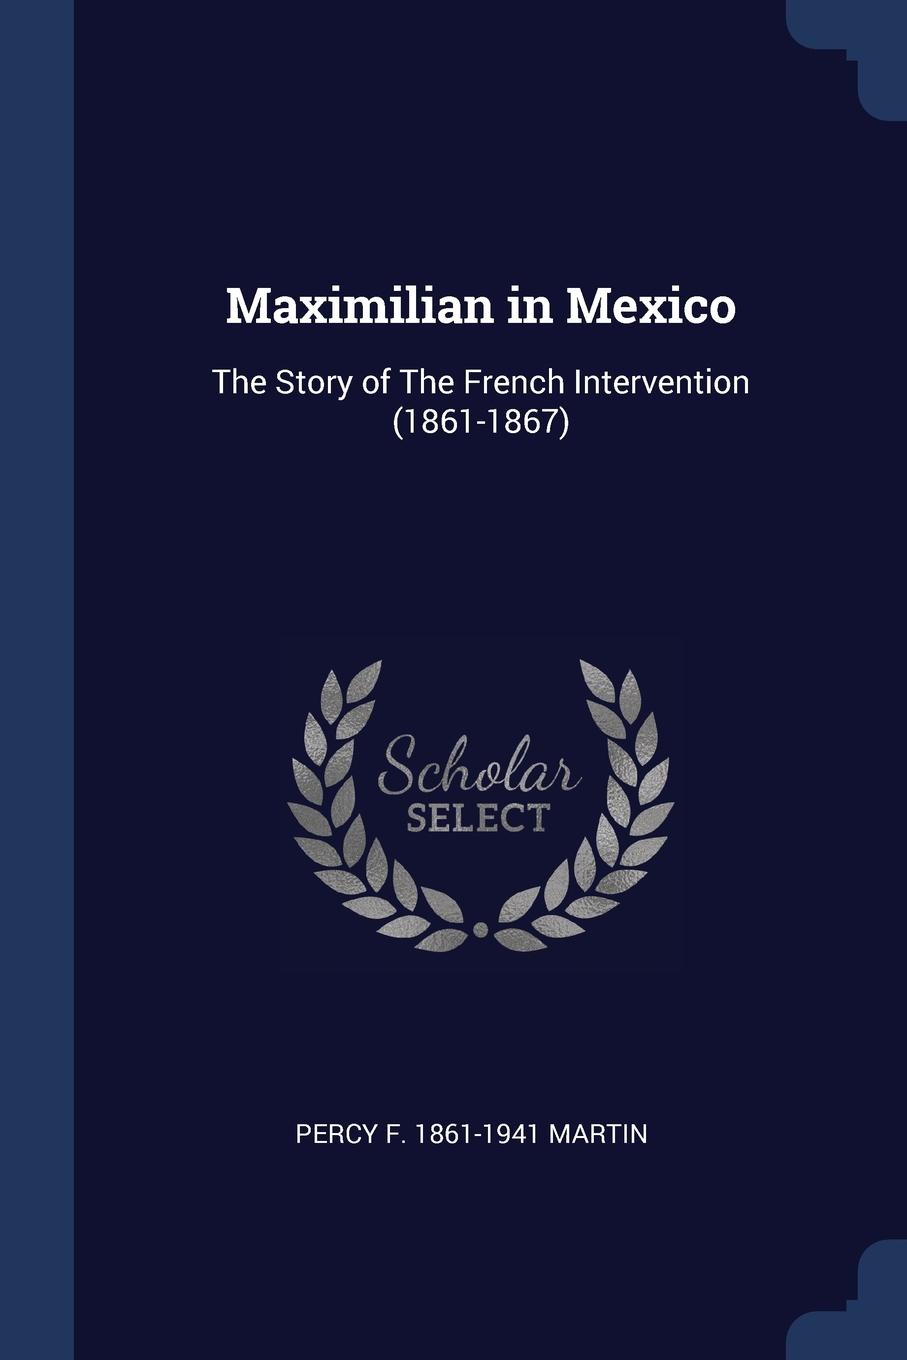 Maximilian in Mexico. The Story of The French Intervention (1861-1867)